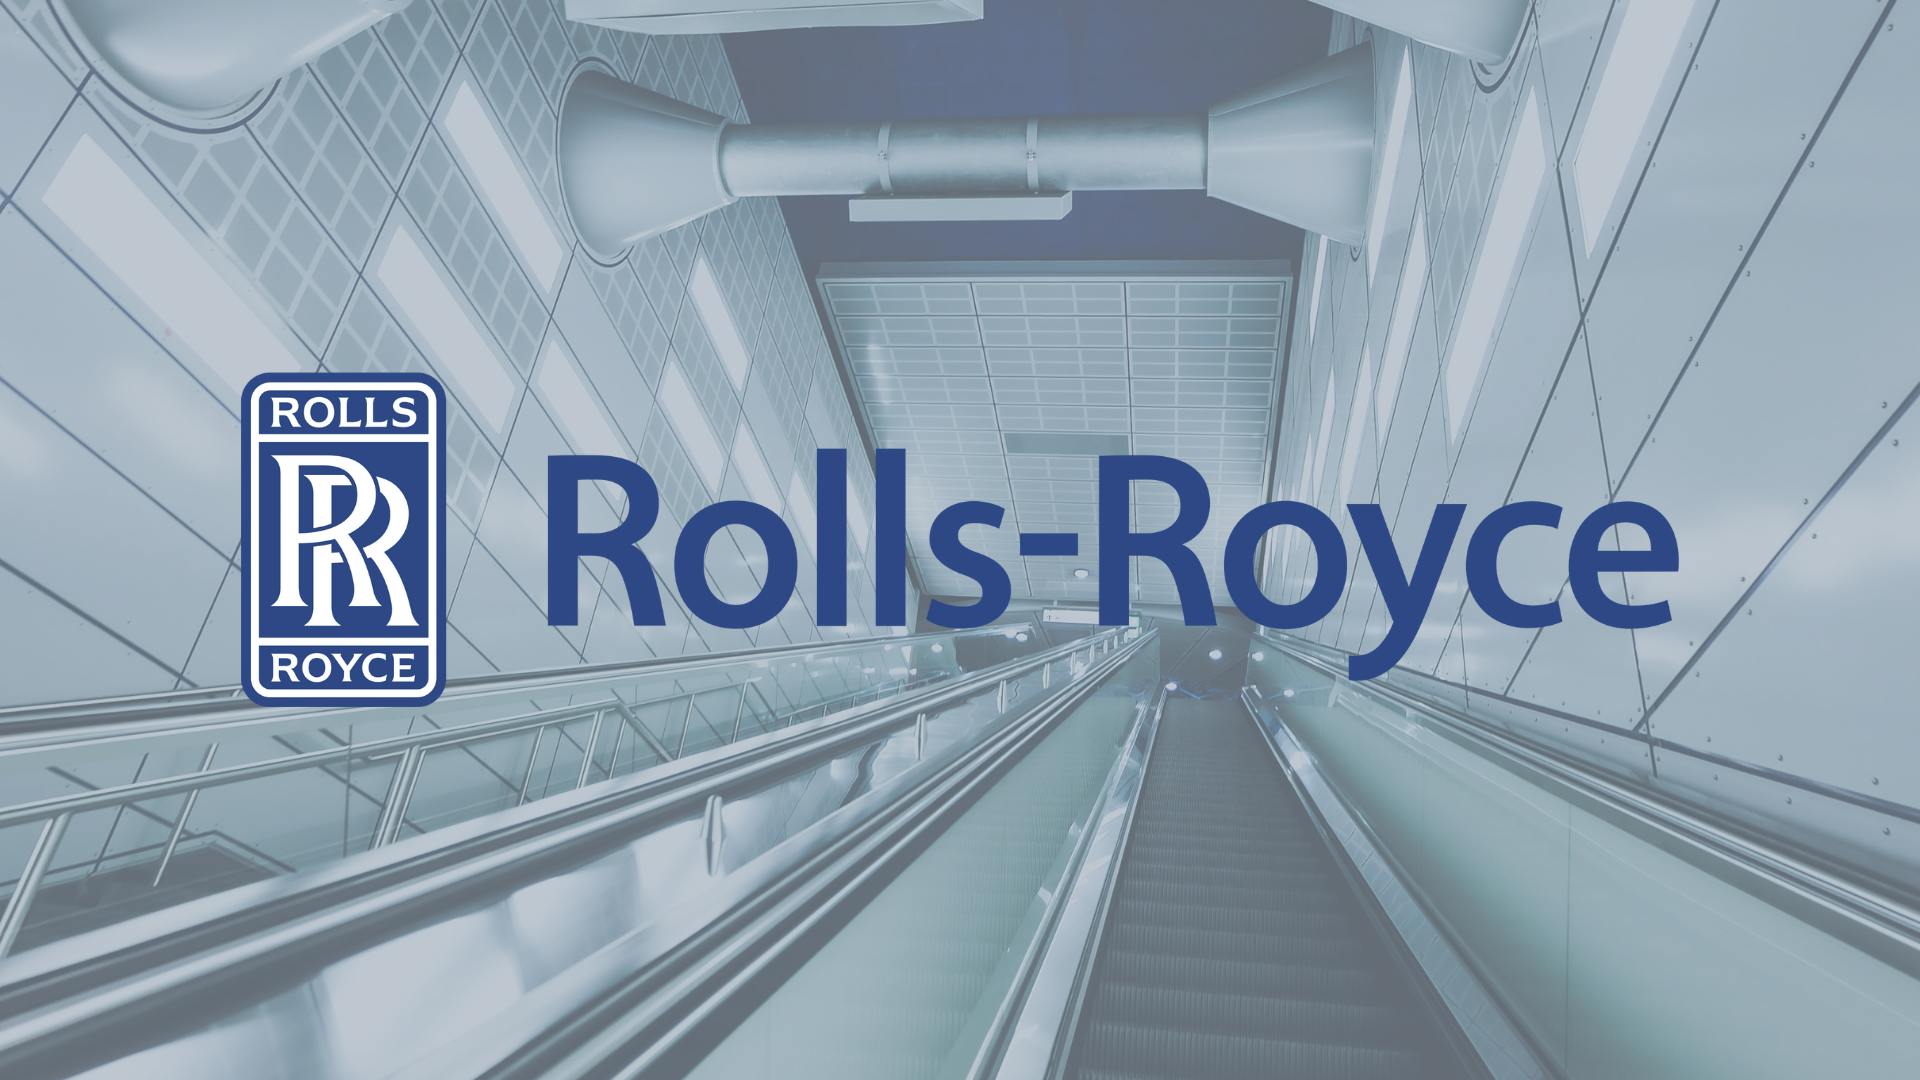 Press Release: SDIA Welcomes Rolls-Royce to its Vibrant, Fast-growing Community